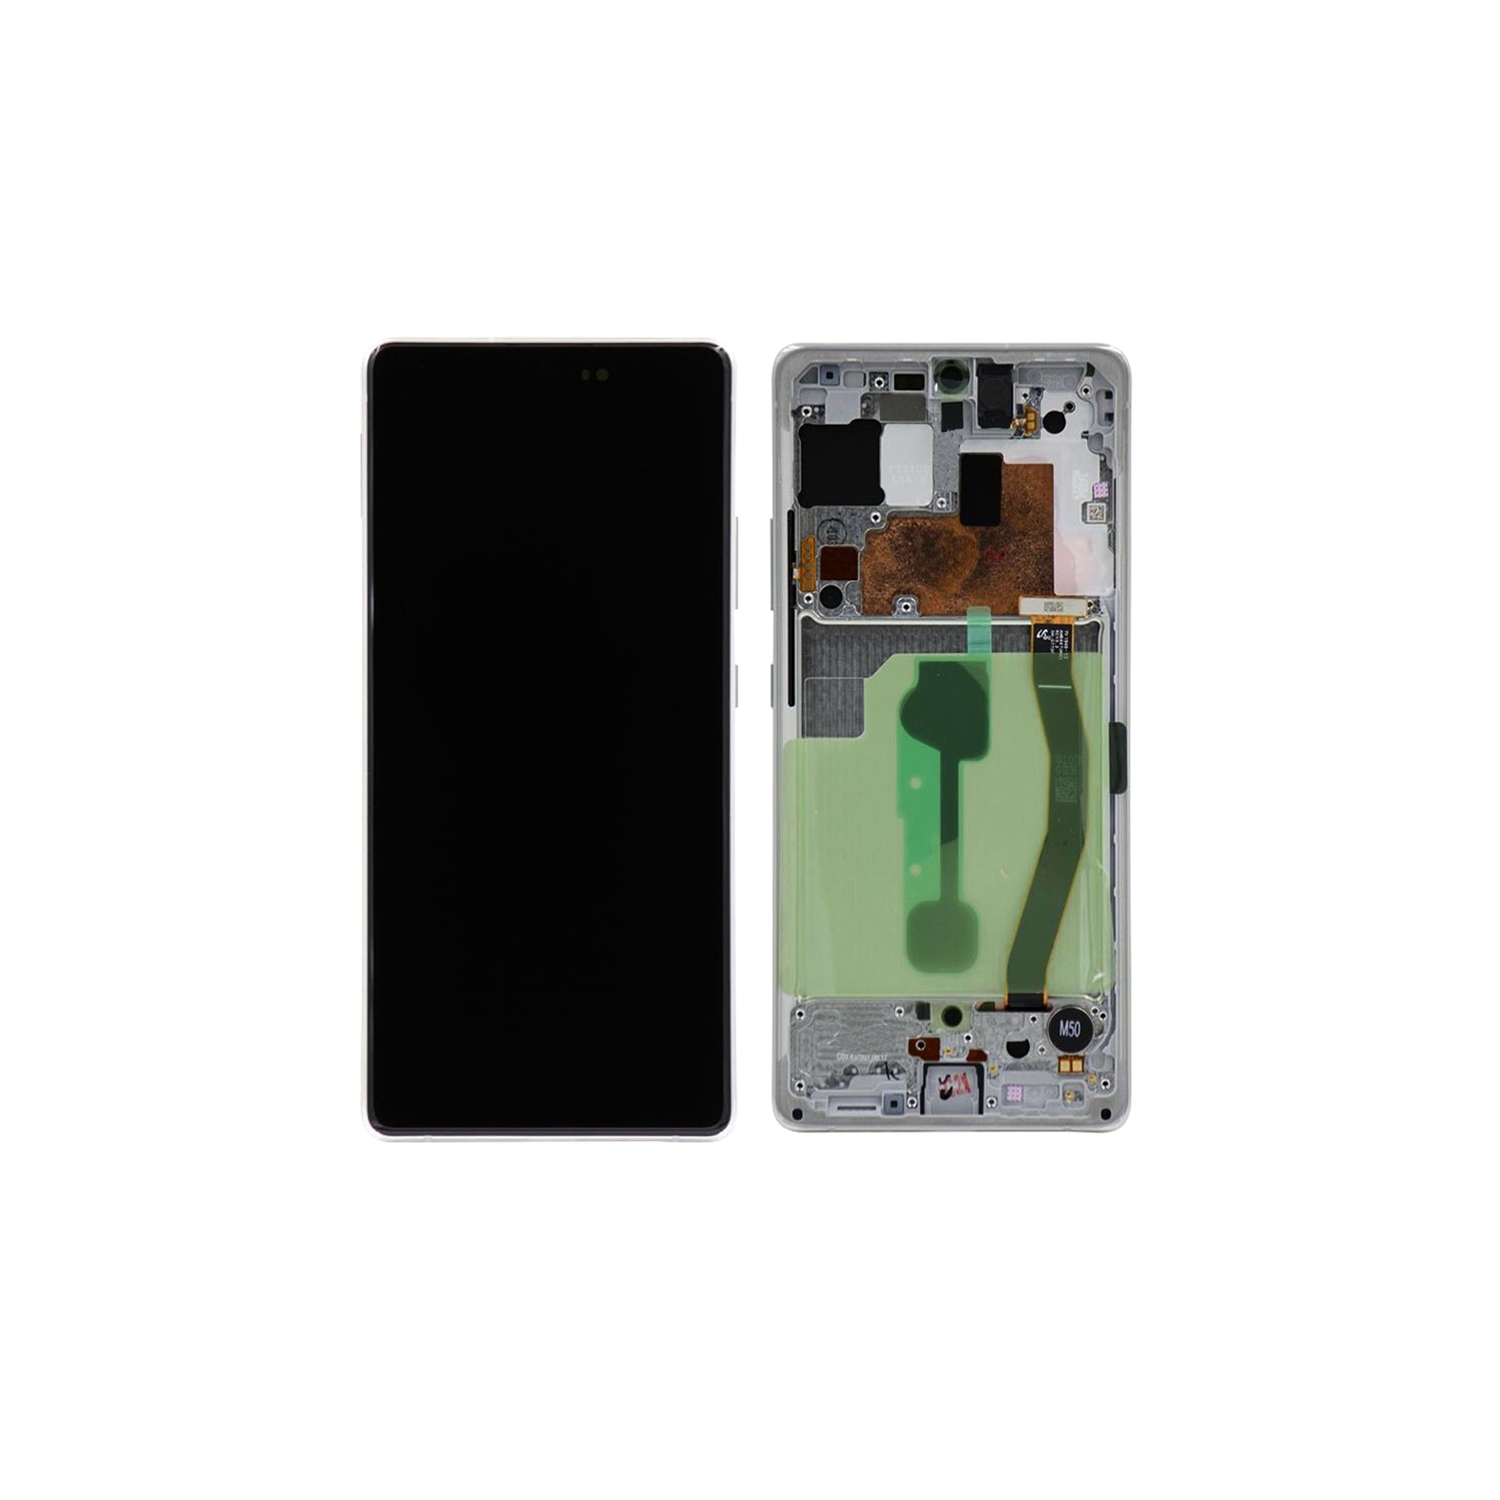 LCD Display Touch Screen Digitizer Assembly + Frame For Samsung Galaxy S10 Lite (SM-G770F) - Prism White (Refurbished)